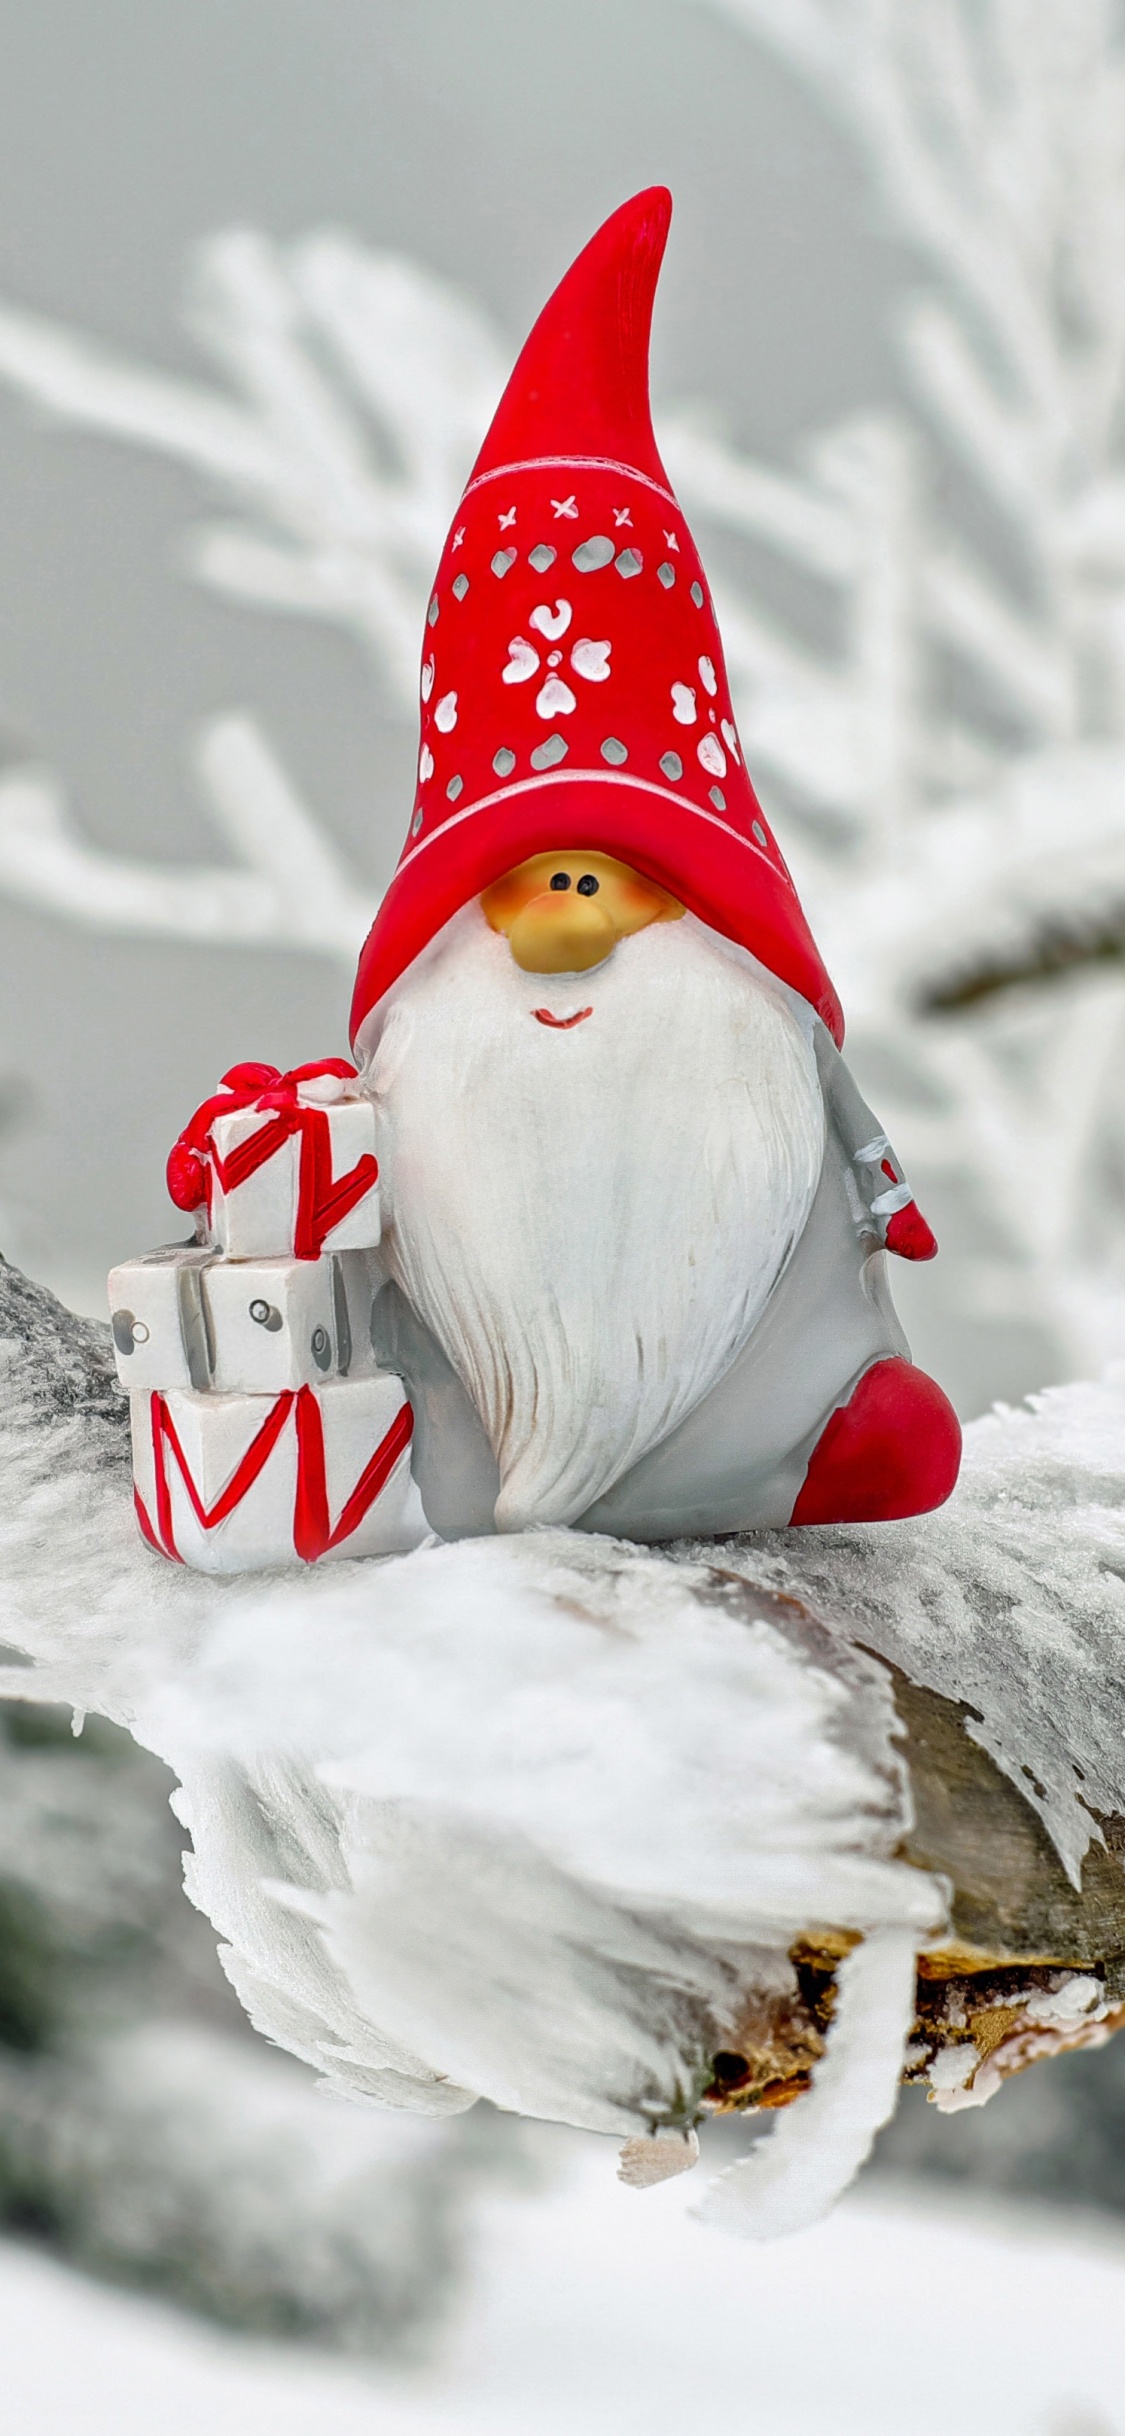 Santa Claus, Christmas Day, Winter, Snow, Freezing. Wallpaper in 1125x2436 Resolution